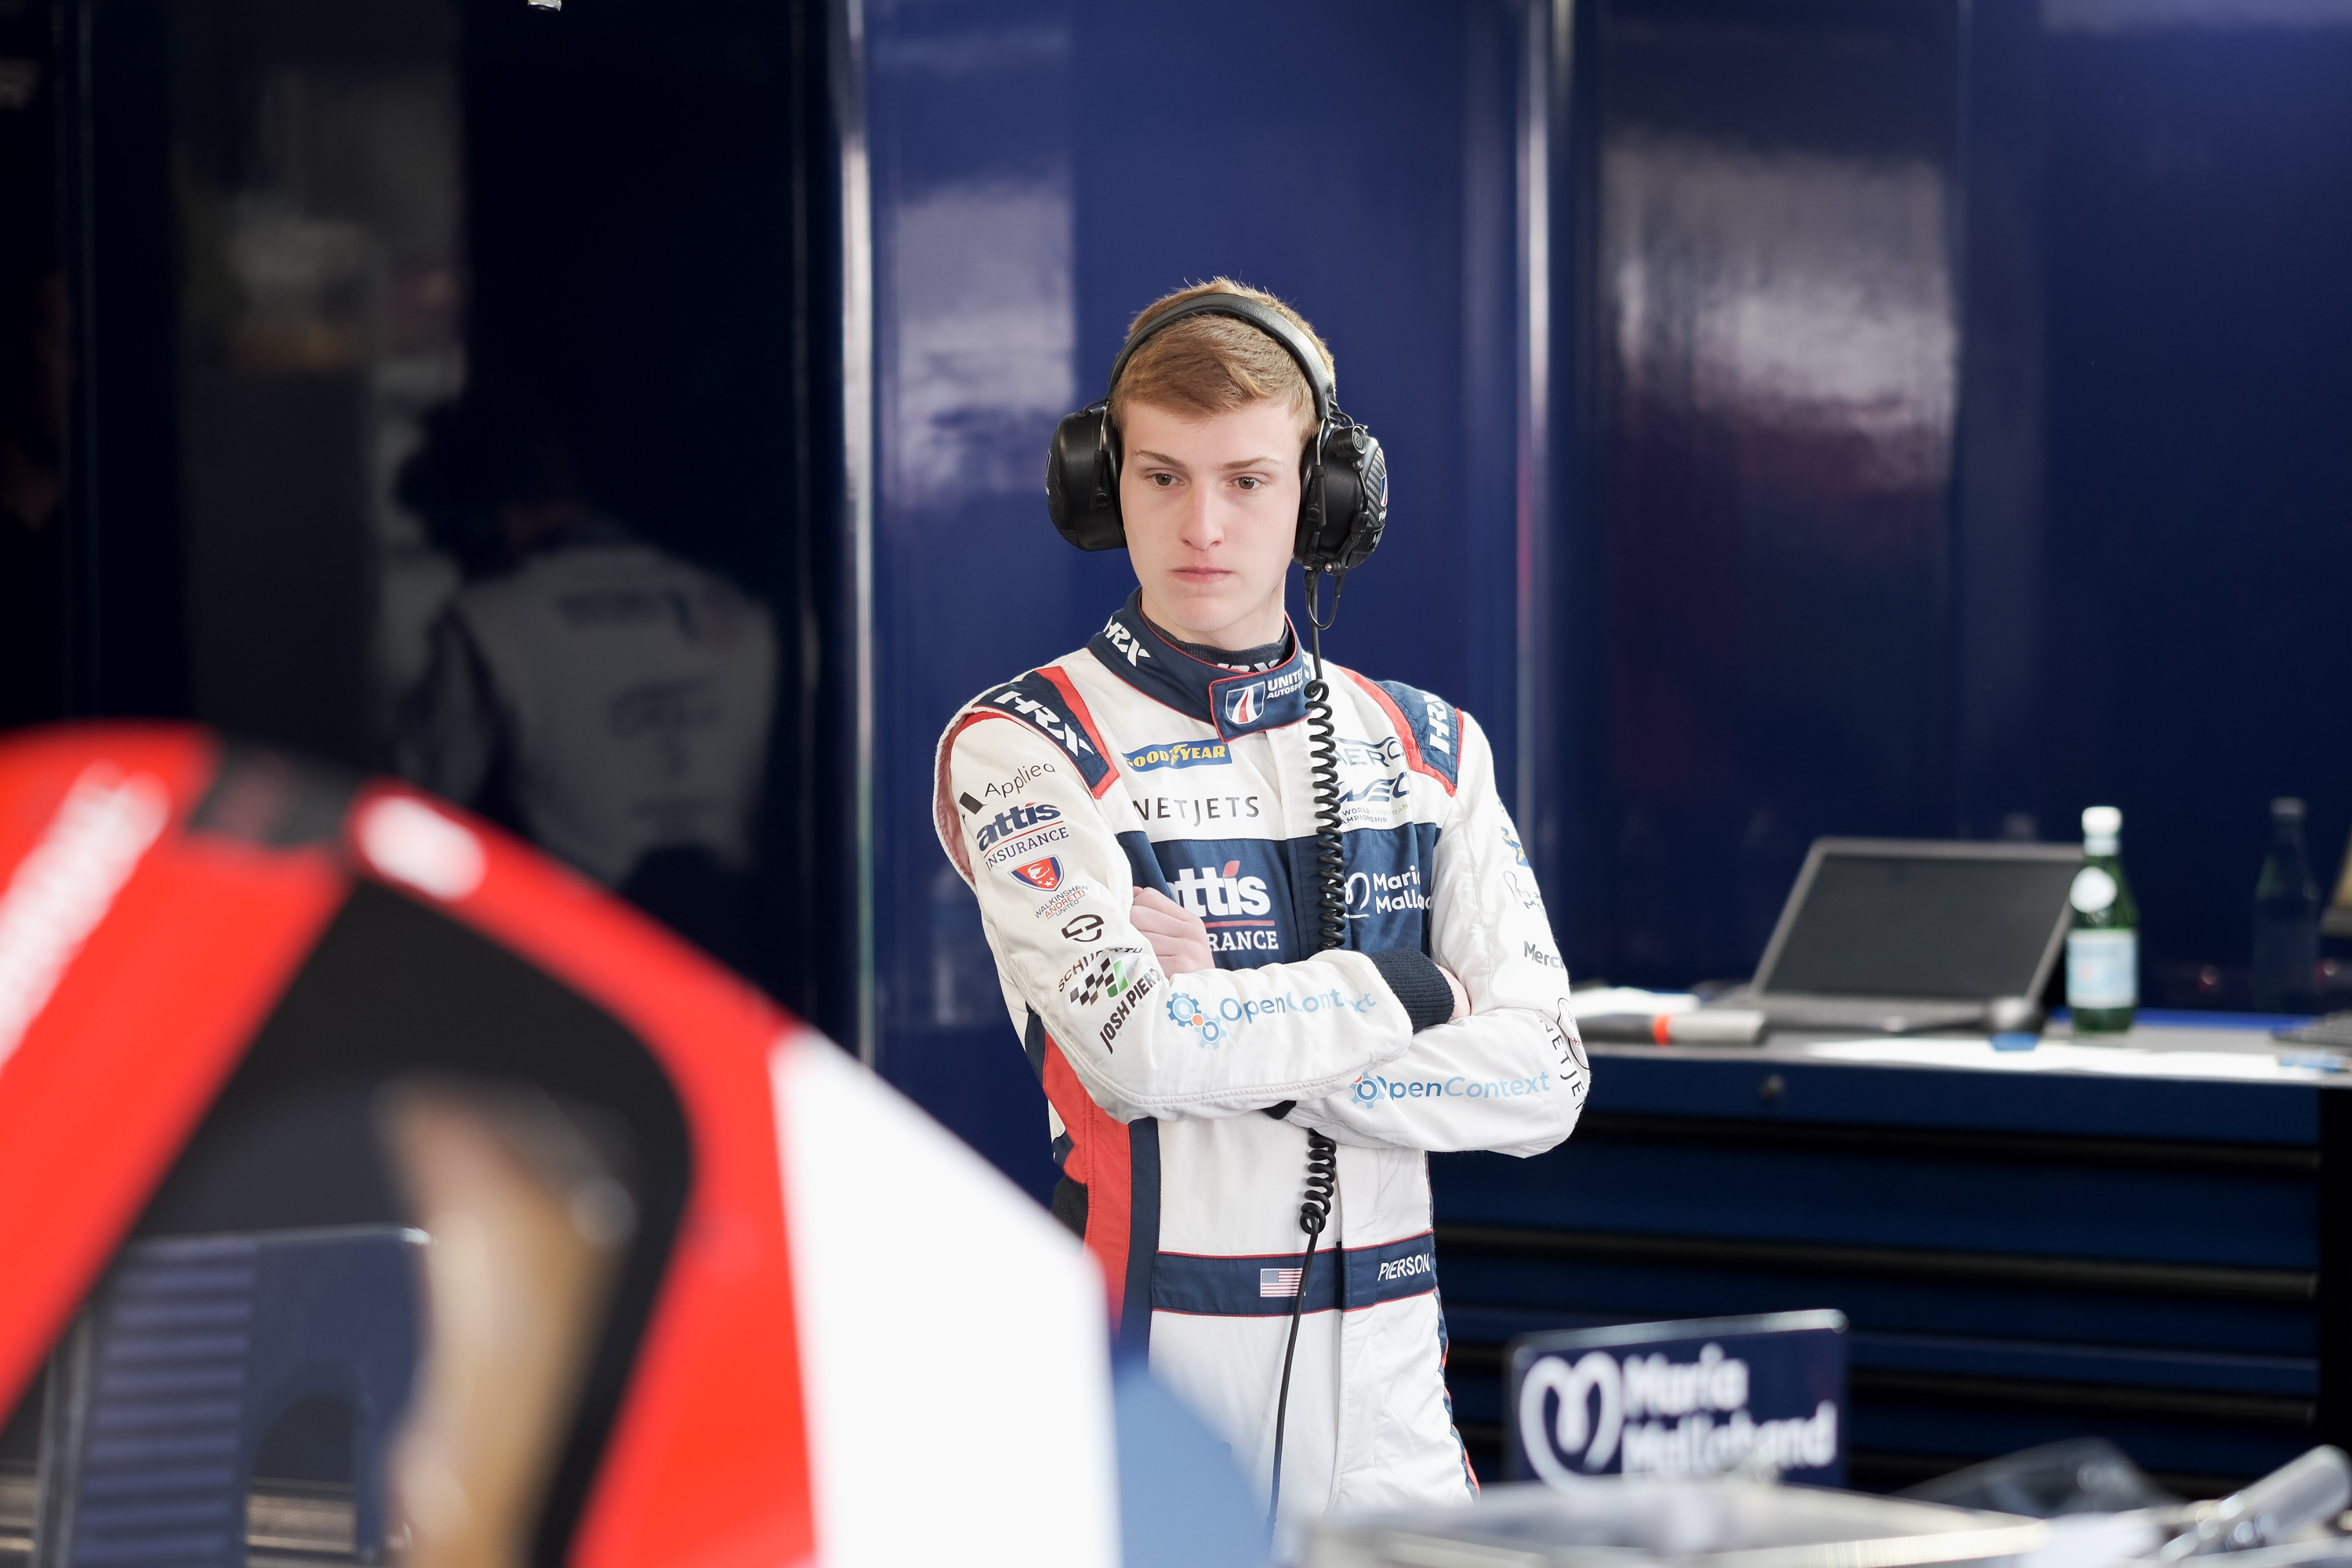 Joshua Pierson, the youngest driver to take part in the 24 Hours in 2022, continues to hone his racing skills with United Autosports in LMP2.